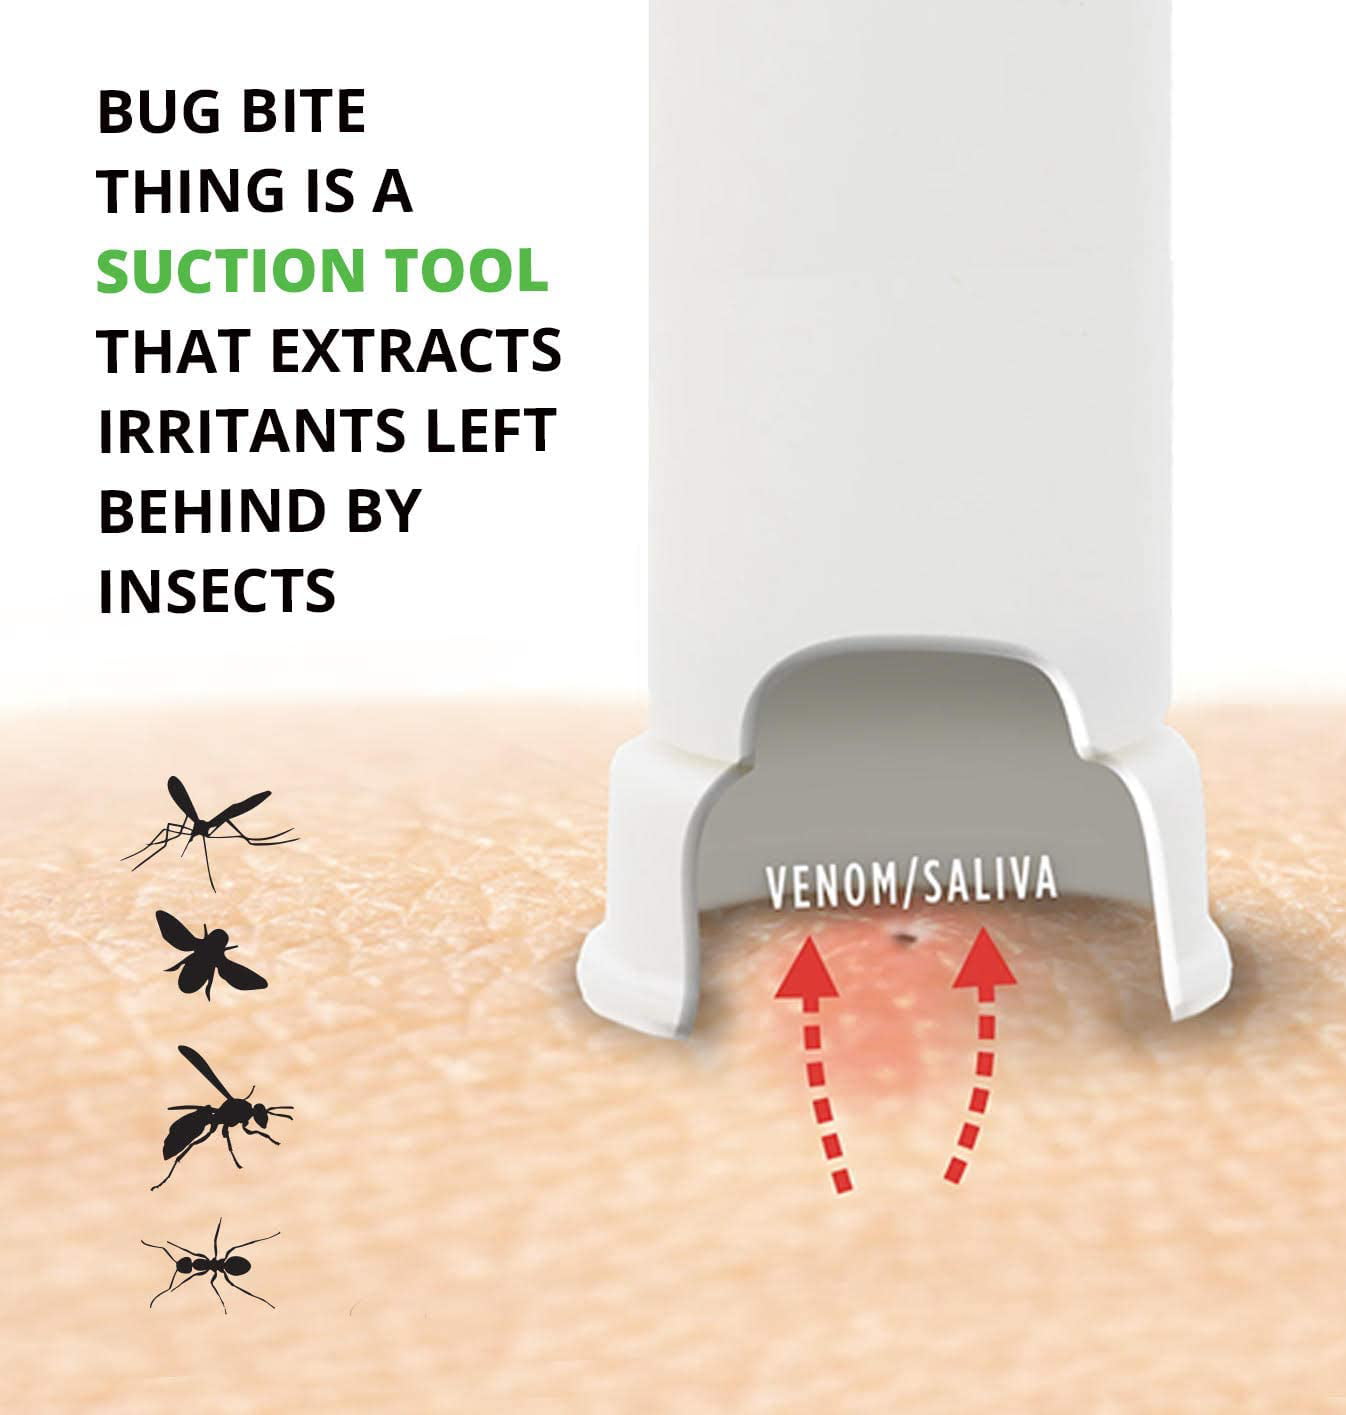 Itch Relief Suction Tool Bug Bite Thing Suction Tool Bug Bites and Bee Wasp  Stings Natural Insect Bite Relief Chemical Free - AliExpress